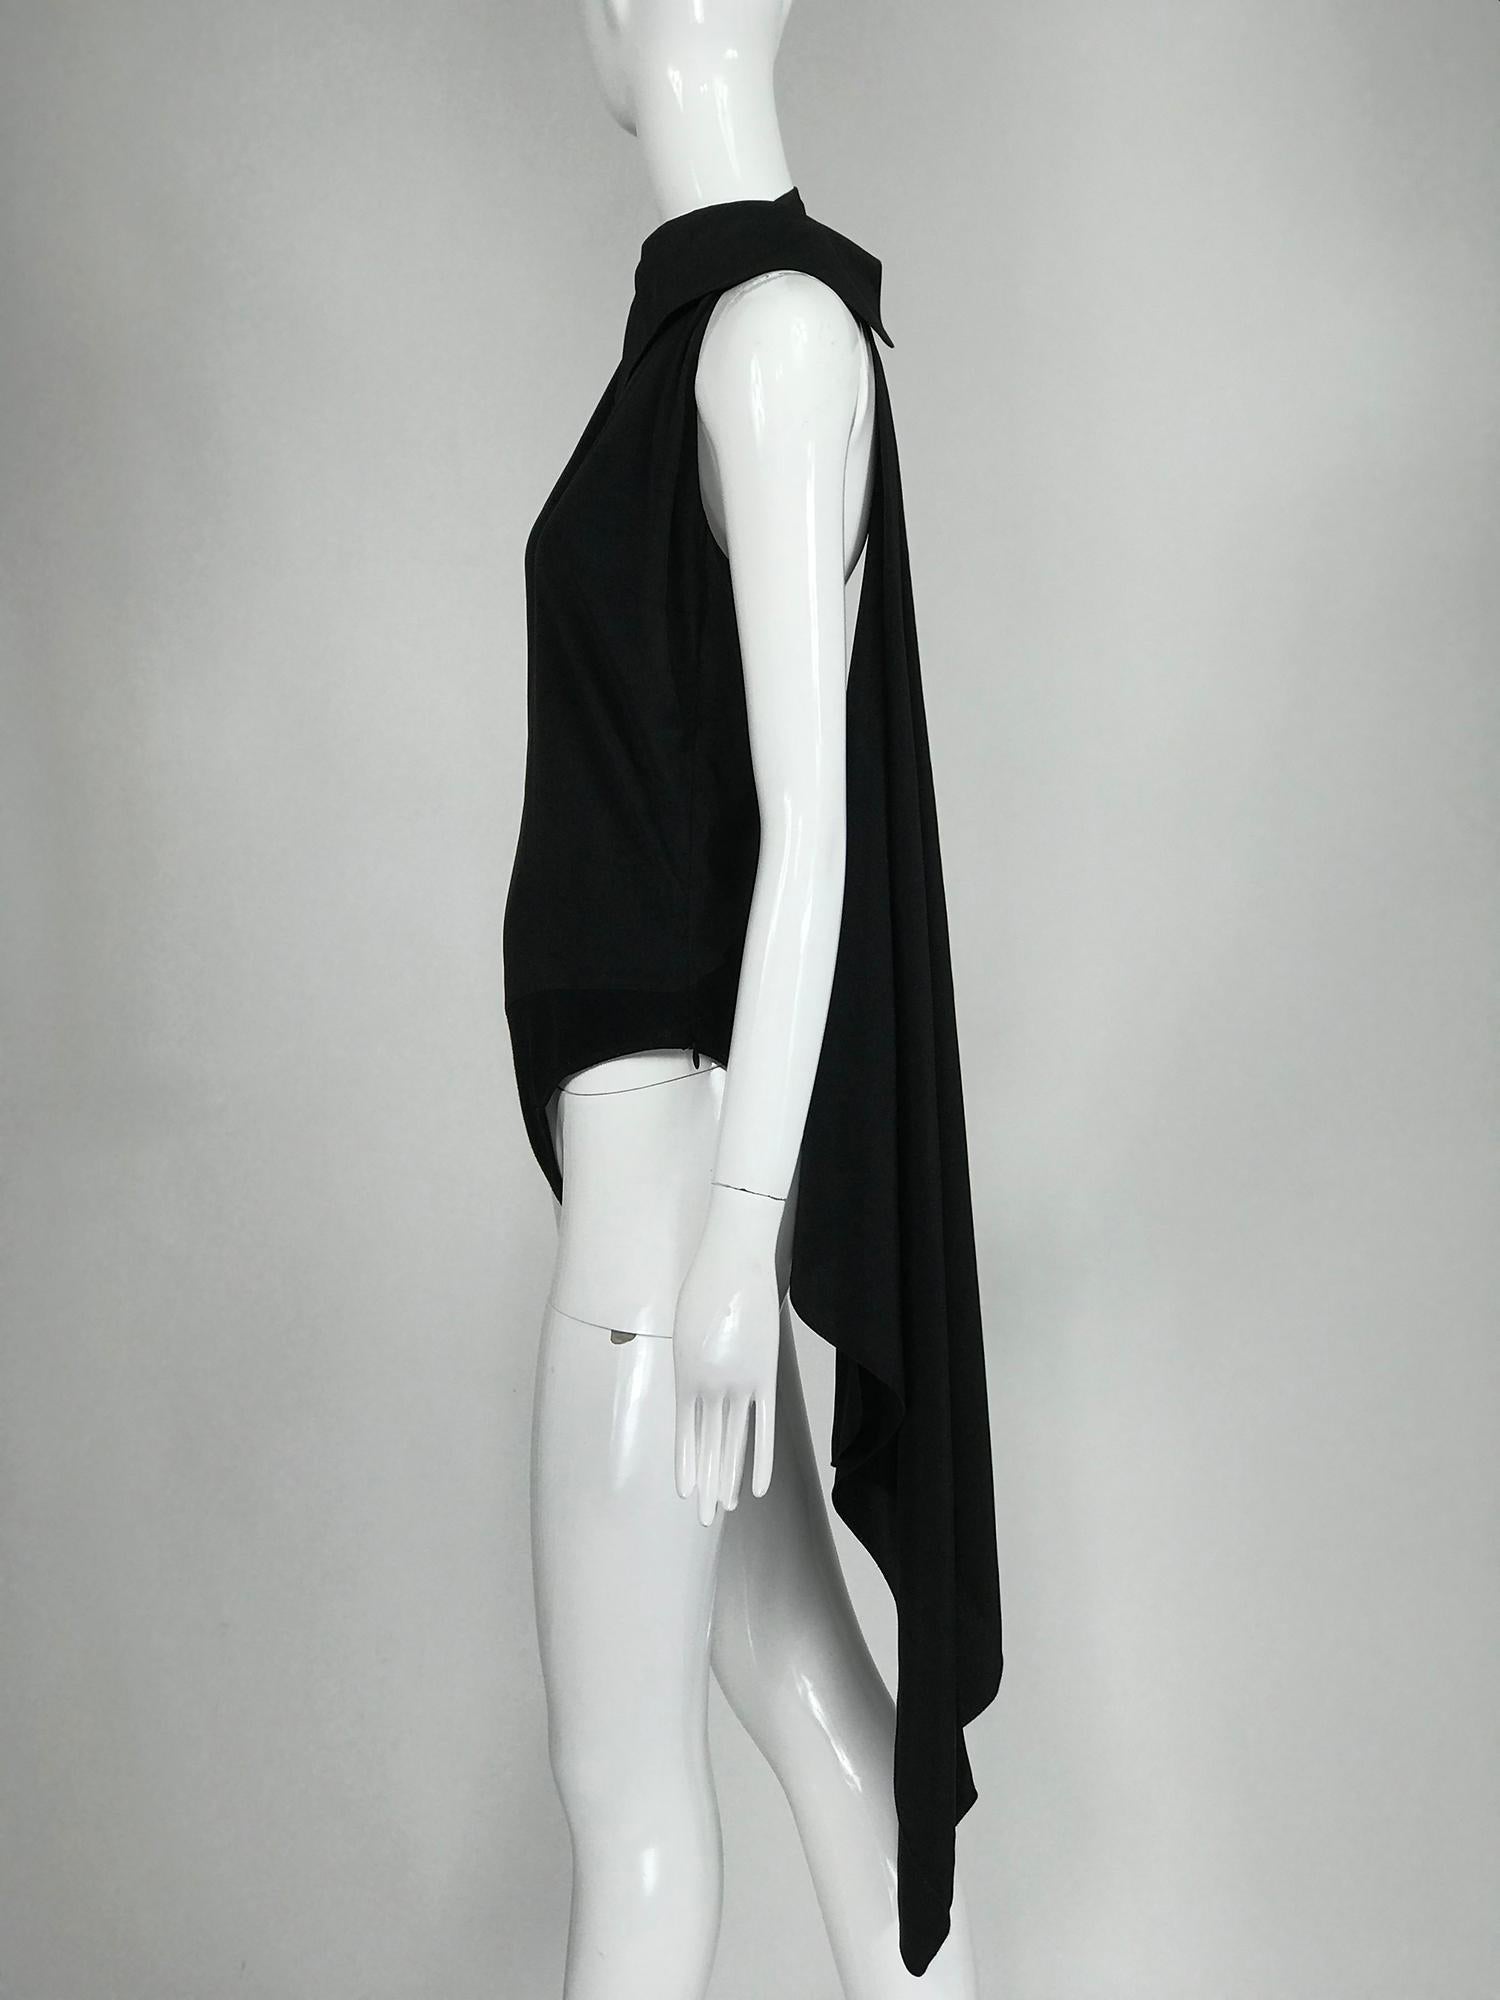 Gianfranco Ferre Black Silk and Sweater Knit Body Suit and Wrap or Drape 1980s For Sale 5